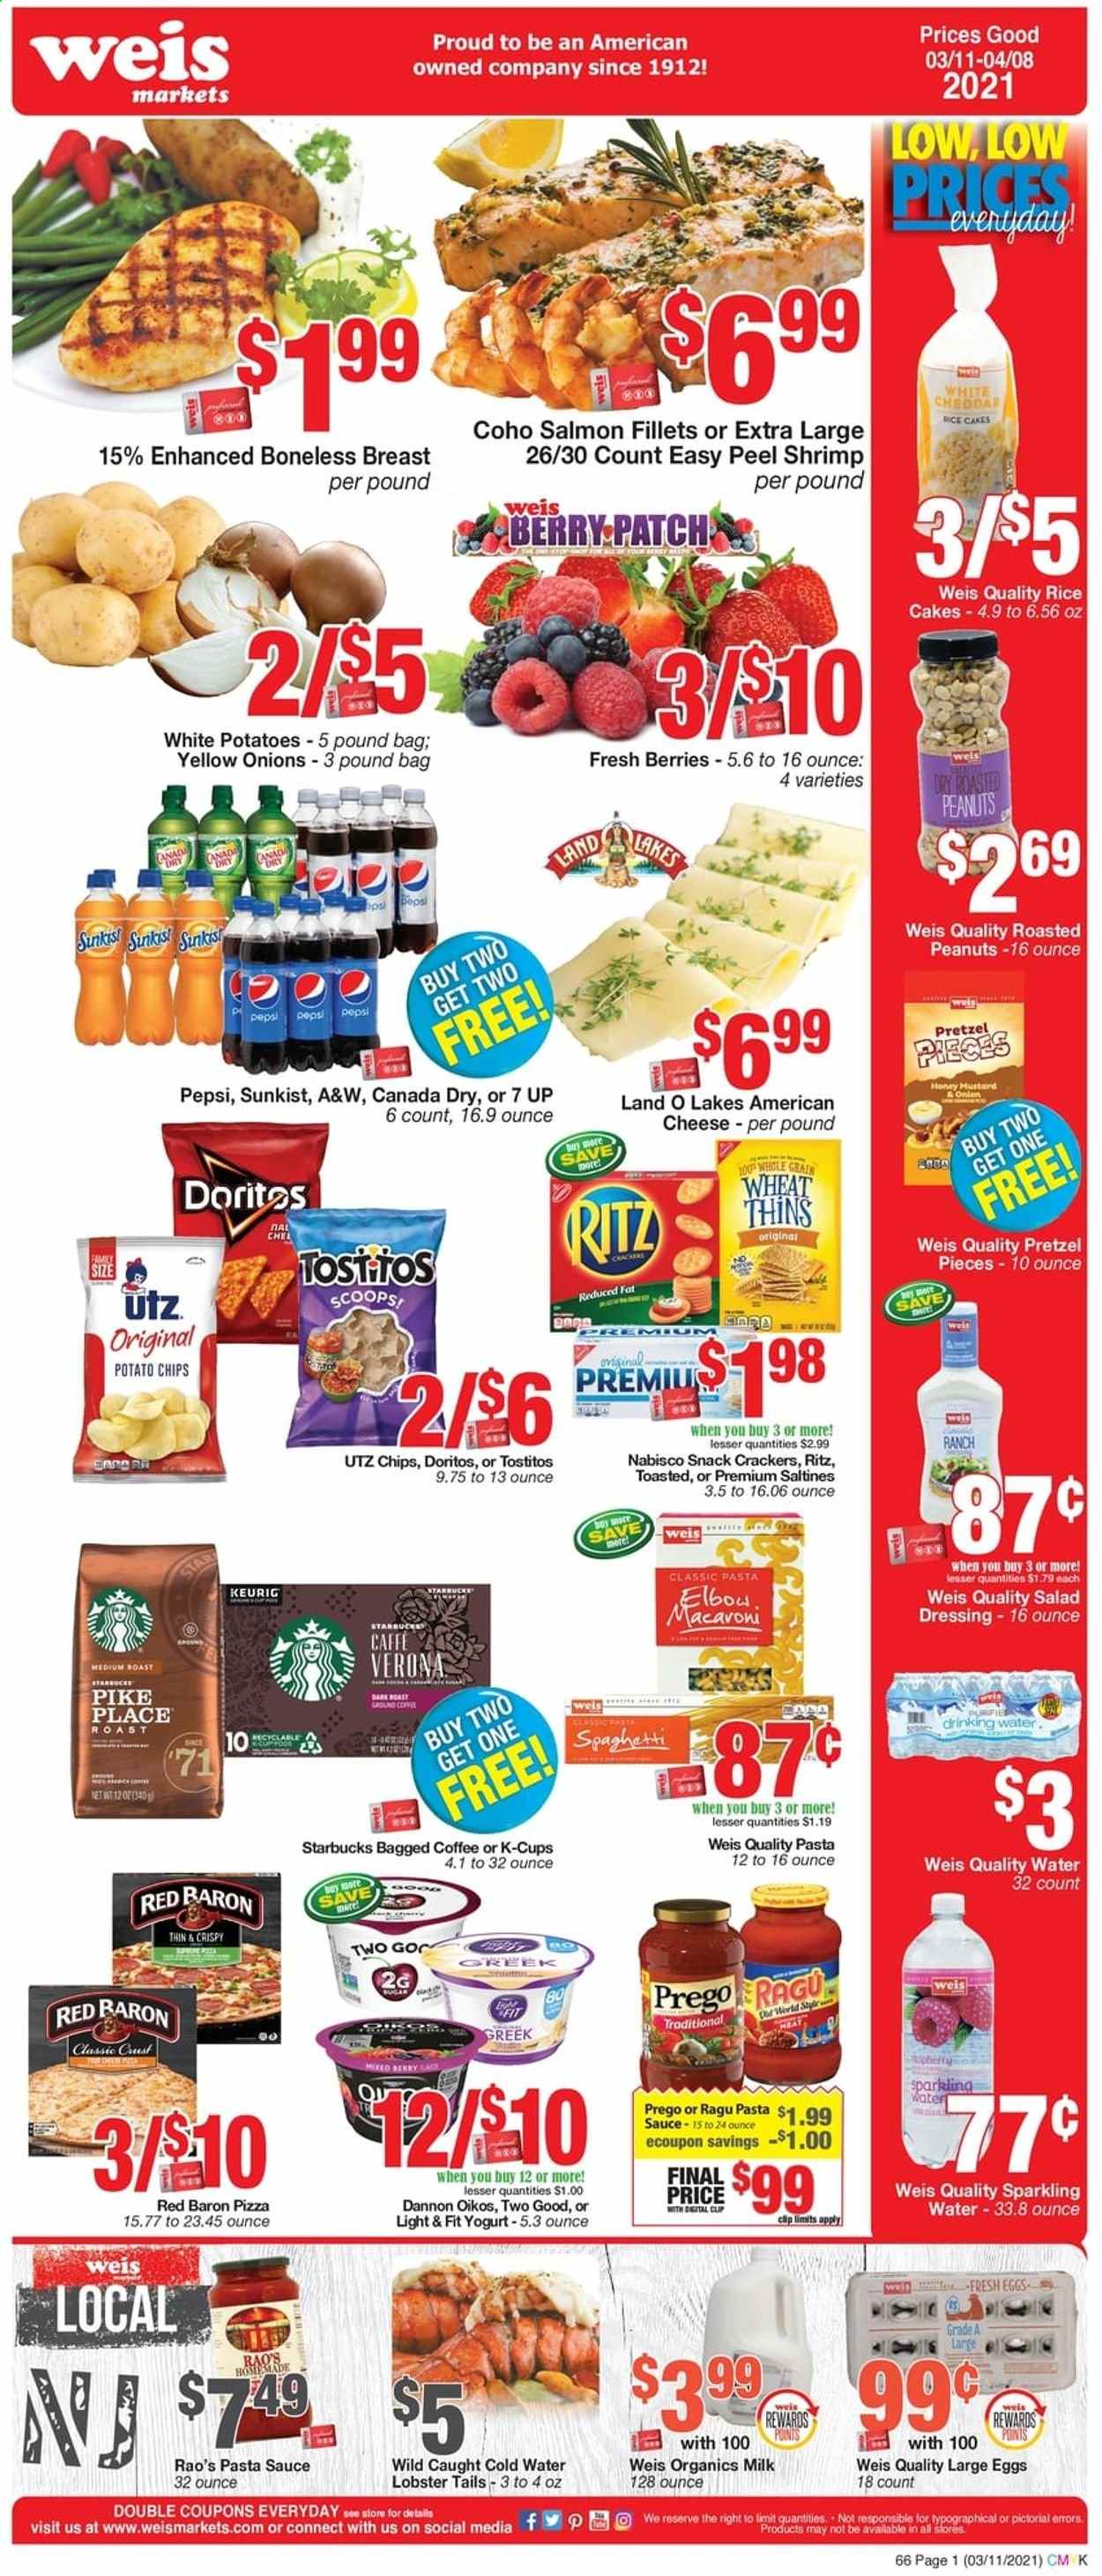 thumbnail - Weis Flyer - 03/11/2021 - 04/08/2021 - Sales products - pretzels, cake, lobster, salmon, salmon fillet, lobster tail, shrimps, pizza, sauce, american cheese, cheese, yoghurt, Oikos, Dannon, organic milk, large eggs, Red Baron, crackers, RITZ, Doritos, potato chips, chips, snack, Thins, saltines, Tostitos, spaghetti, salad dressing, pasta sauce, dressing, ragu, roasted peanuts, peanuts, Canada Dry, Pepsi, 7UP, A&W, sparkling water, Starbucks, K-Cups, Keurig, bagged coffee, onion. Page 1.